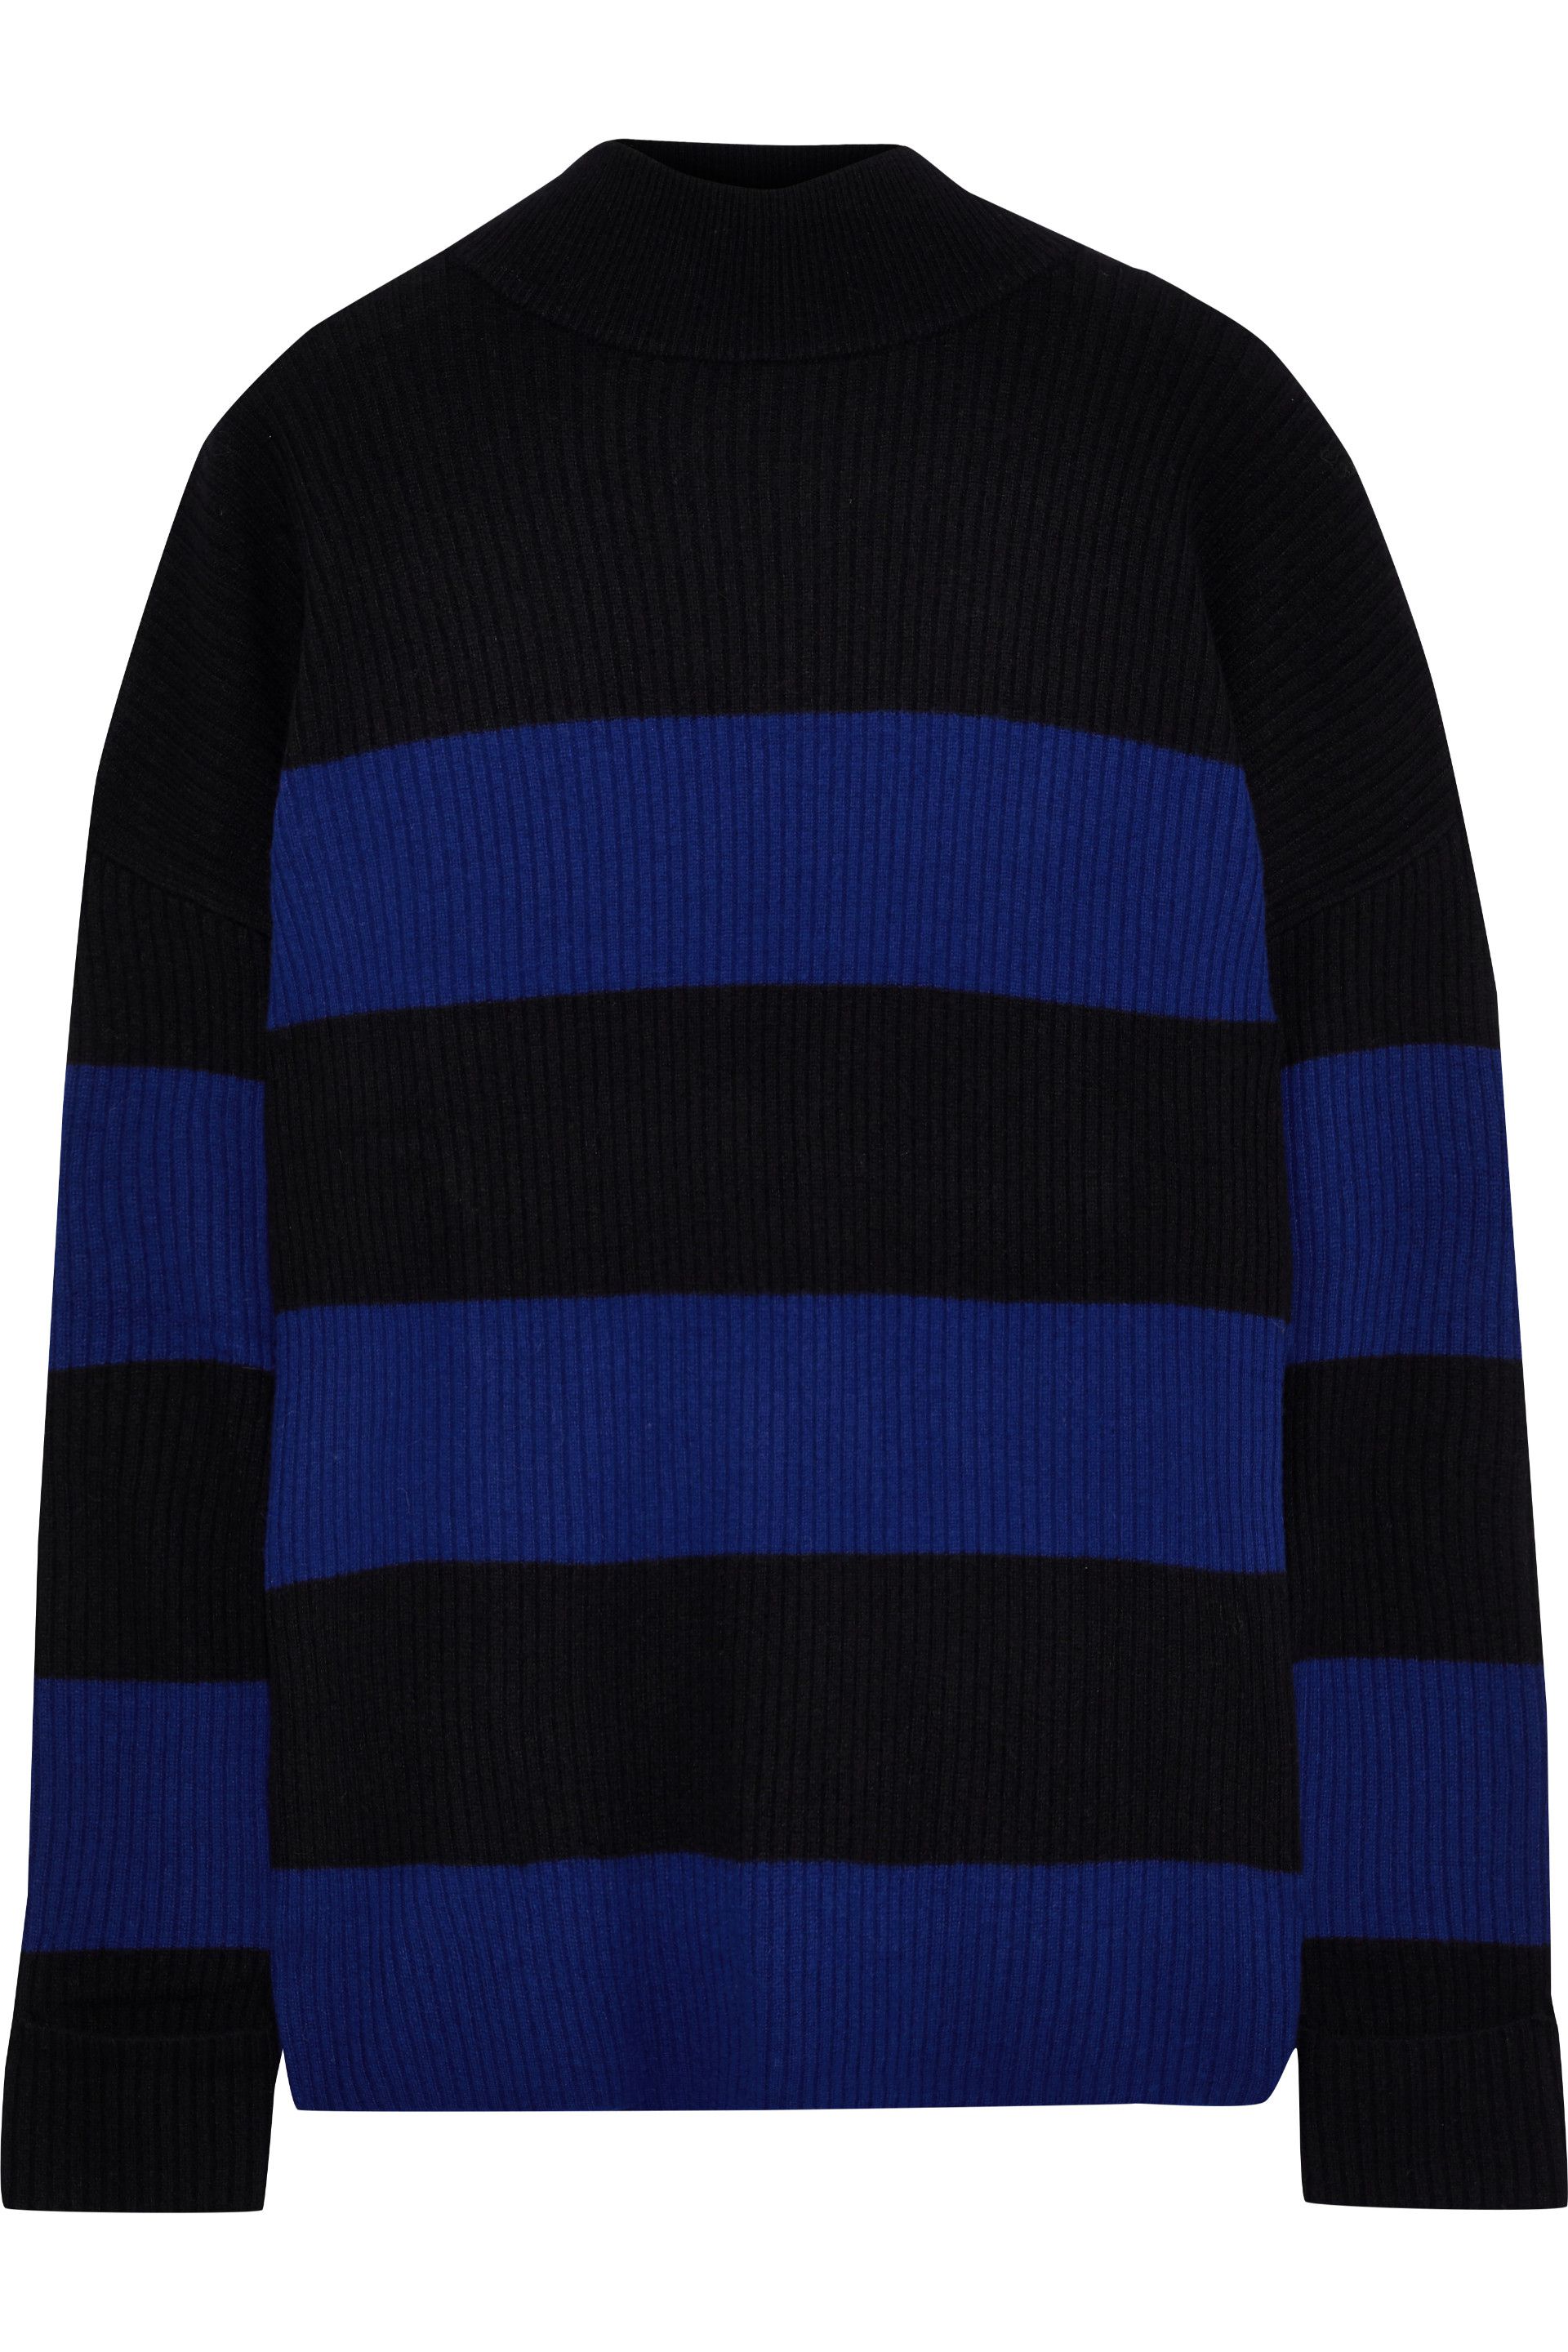 Designer Cashmere Sweaters | Sale Up To 70% Off At THE OUTNET